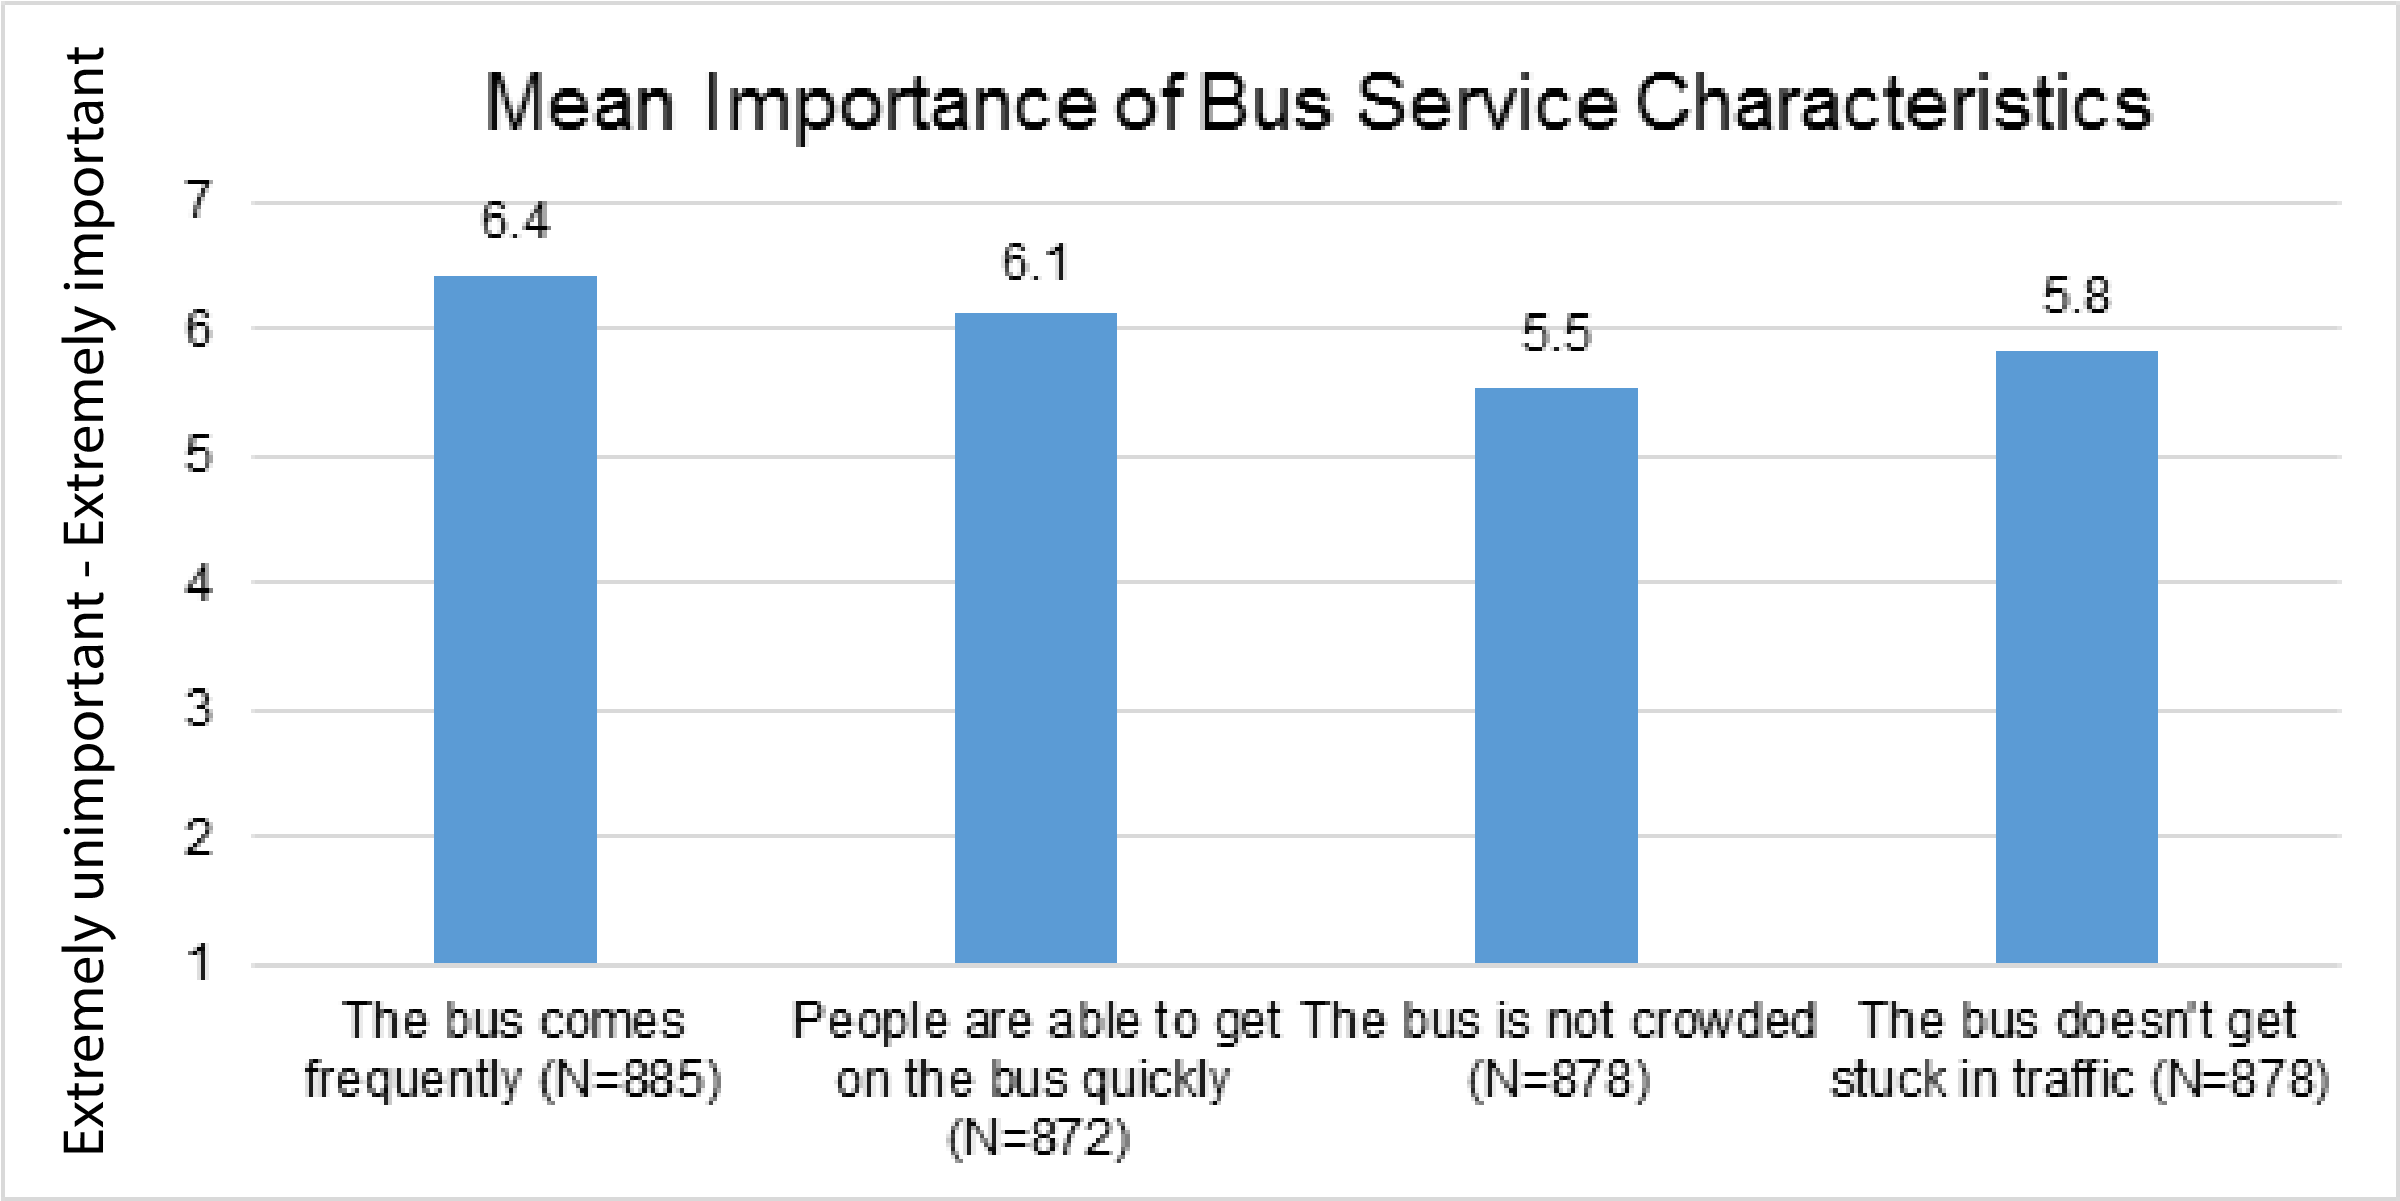 Chart showing survey results ranking the importance of various characteristics of bus service